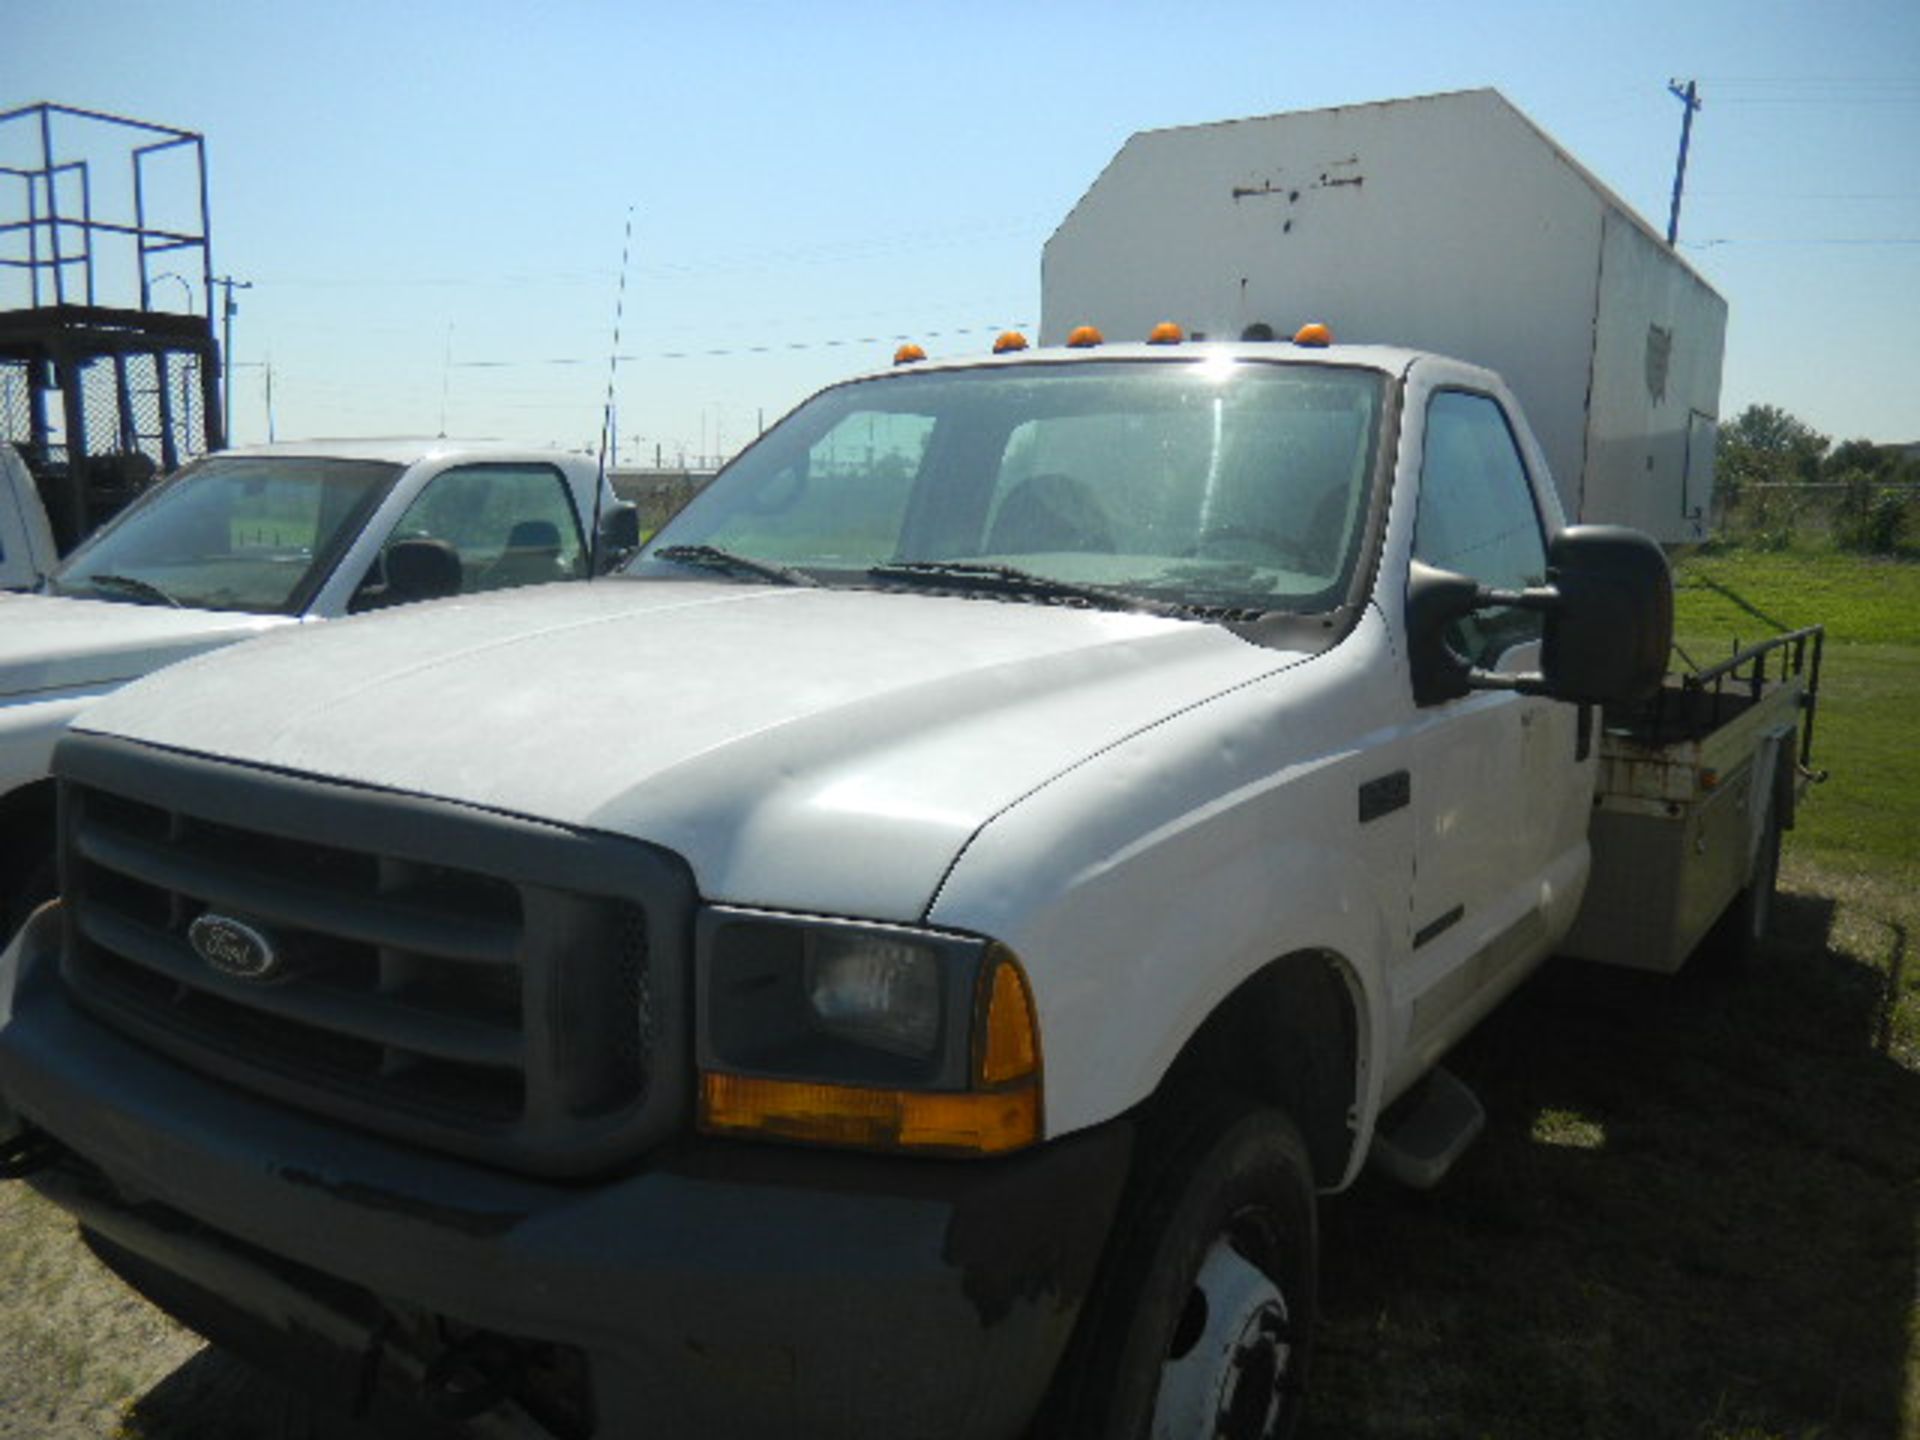 2001 Ford F450 Rod Truck - Asset I.D. #560 - Last of Vin (A44031) - Image 2 of 12